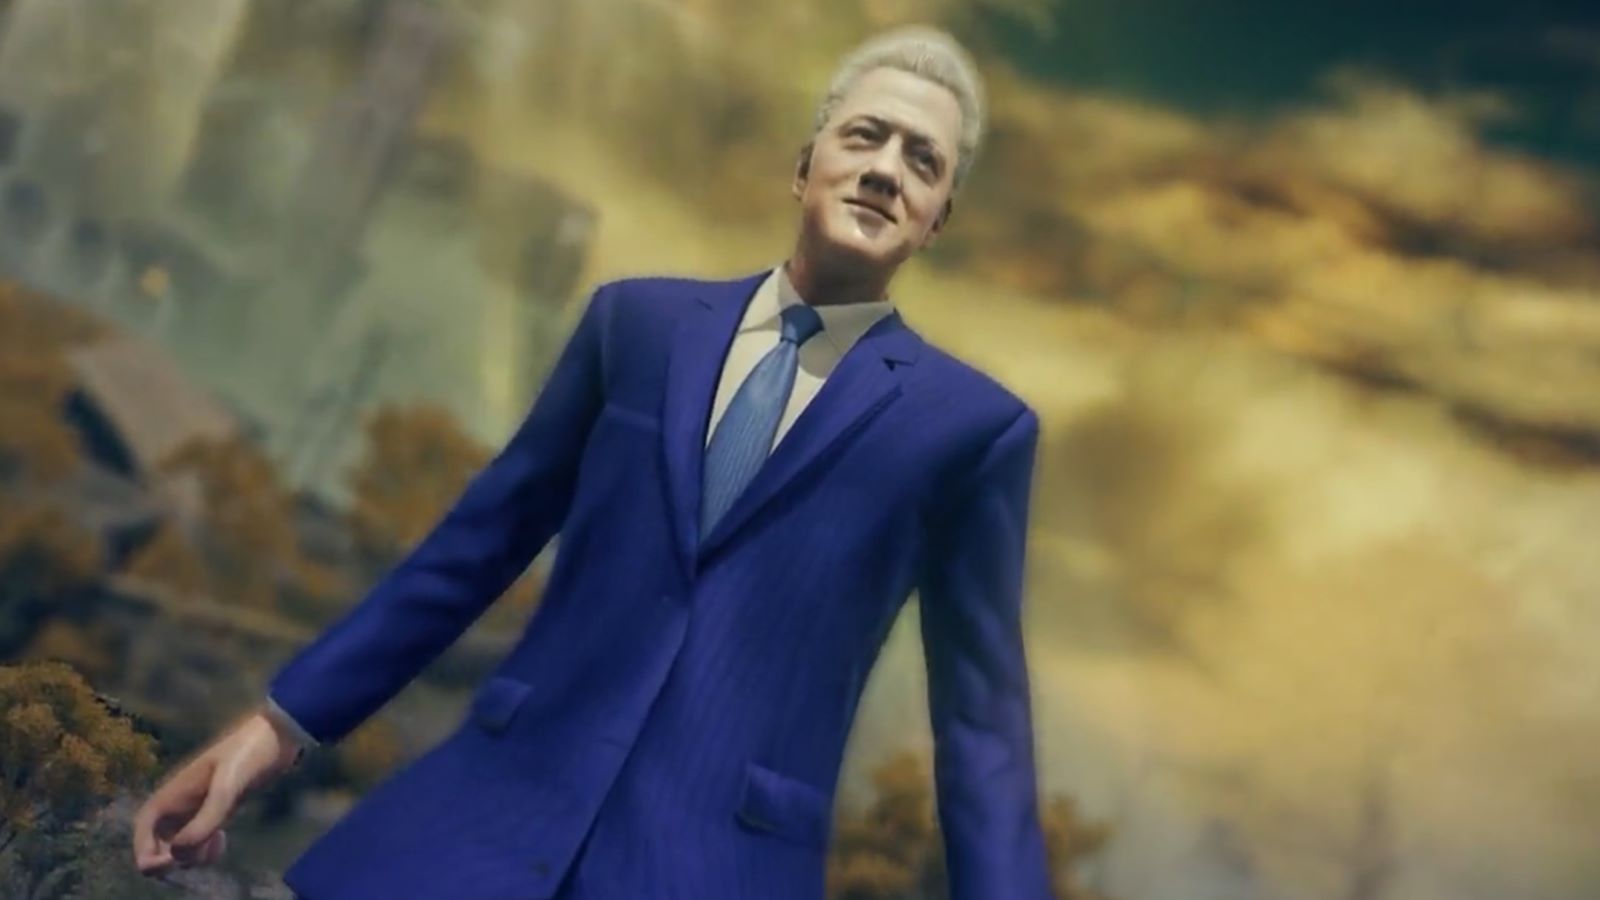 Game Awards 2022 Close-up of Bill Clinton Kid Taken By Security :  r/EldenRingMemes